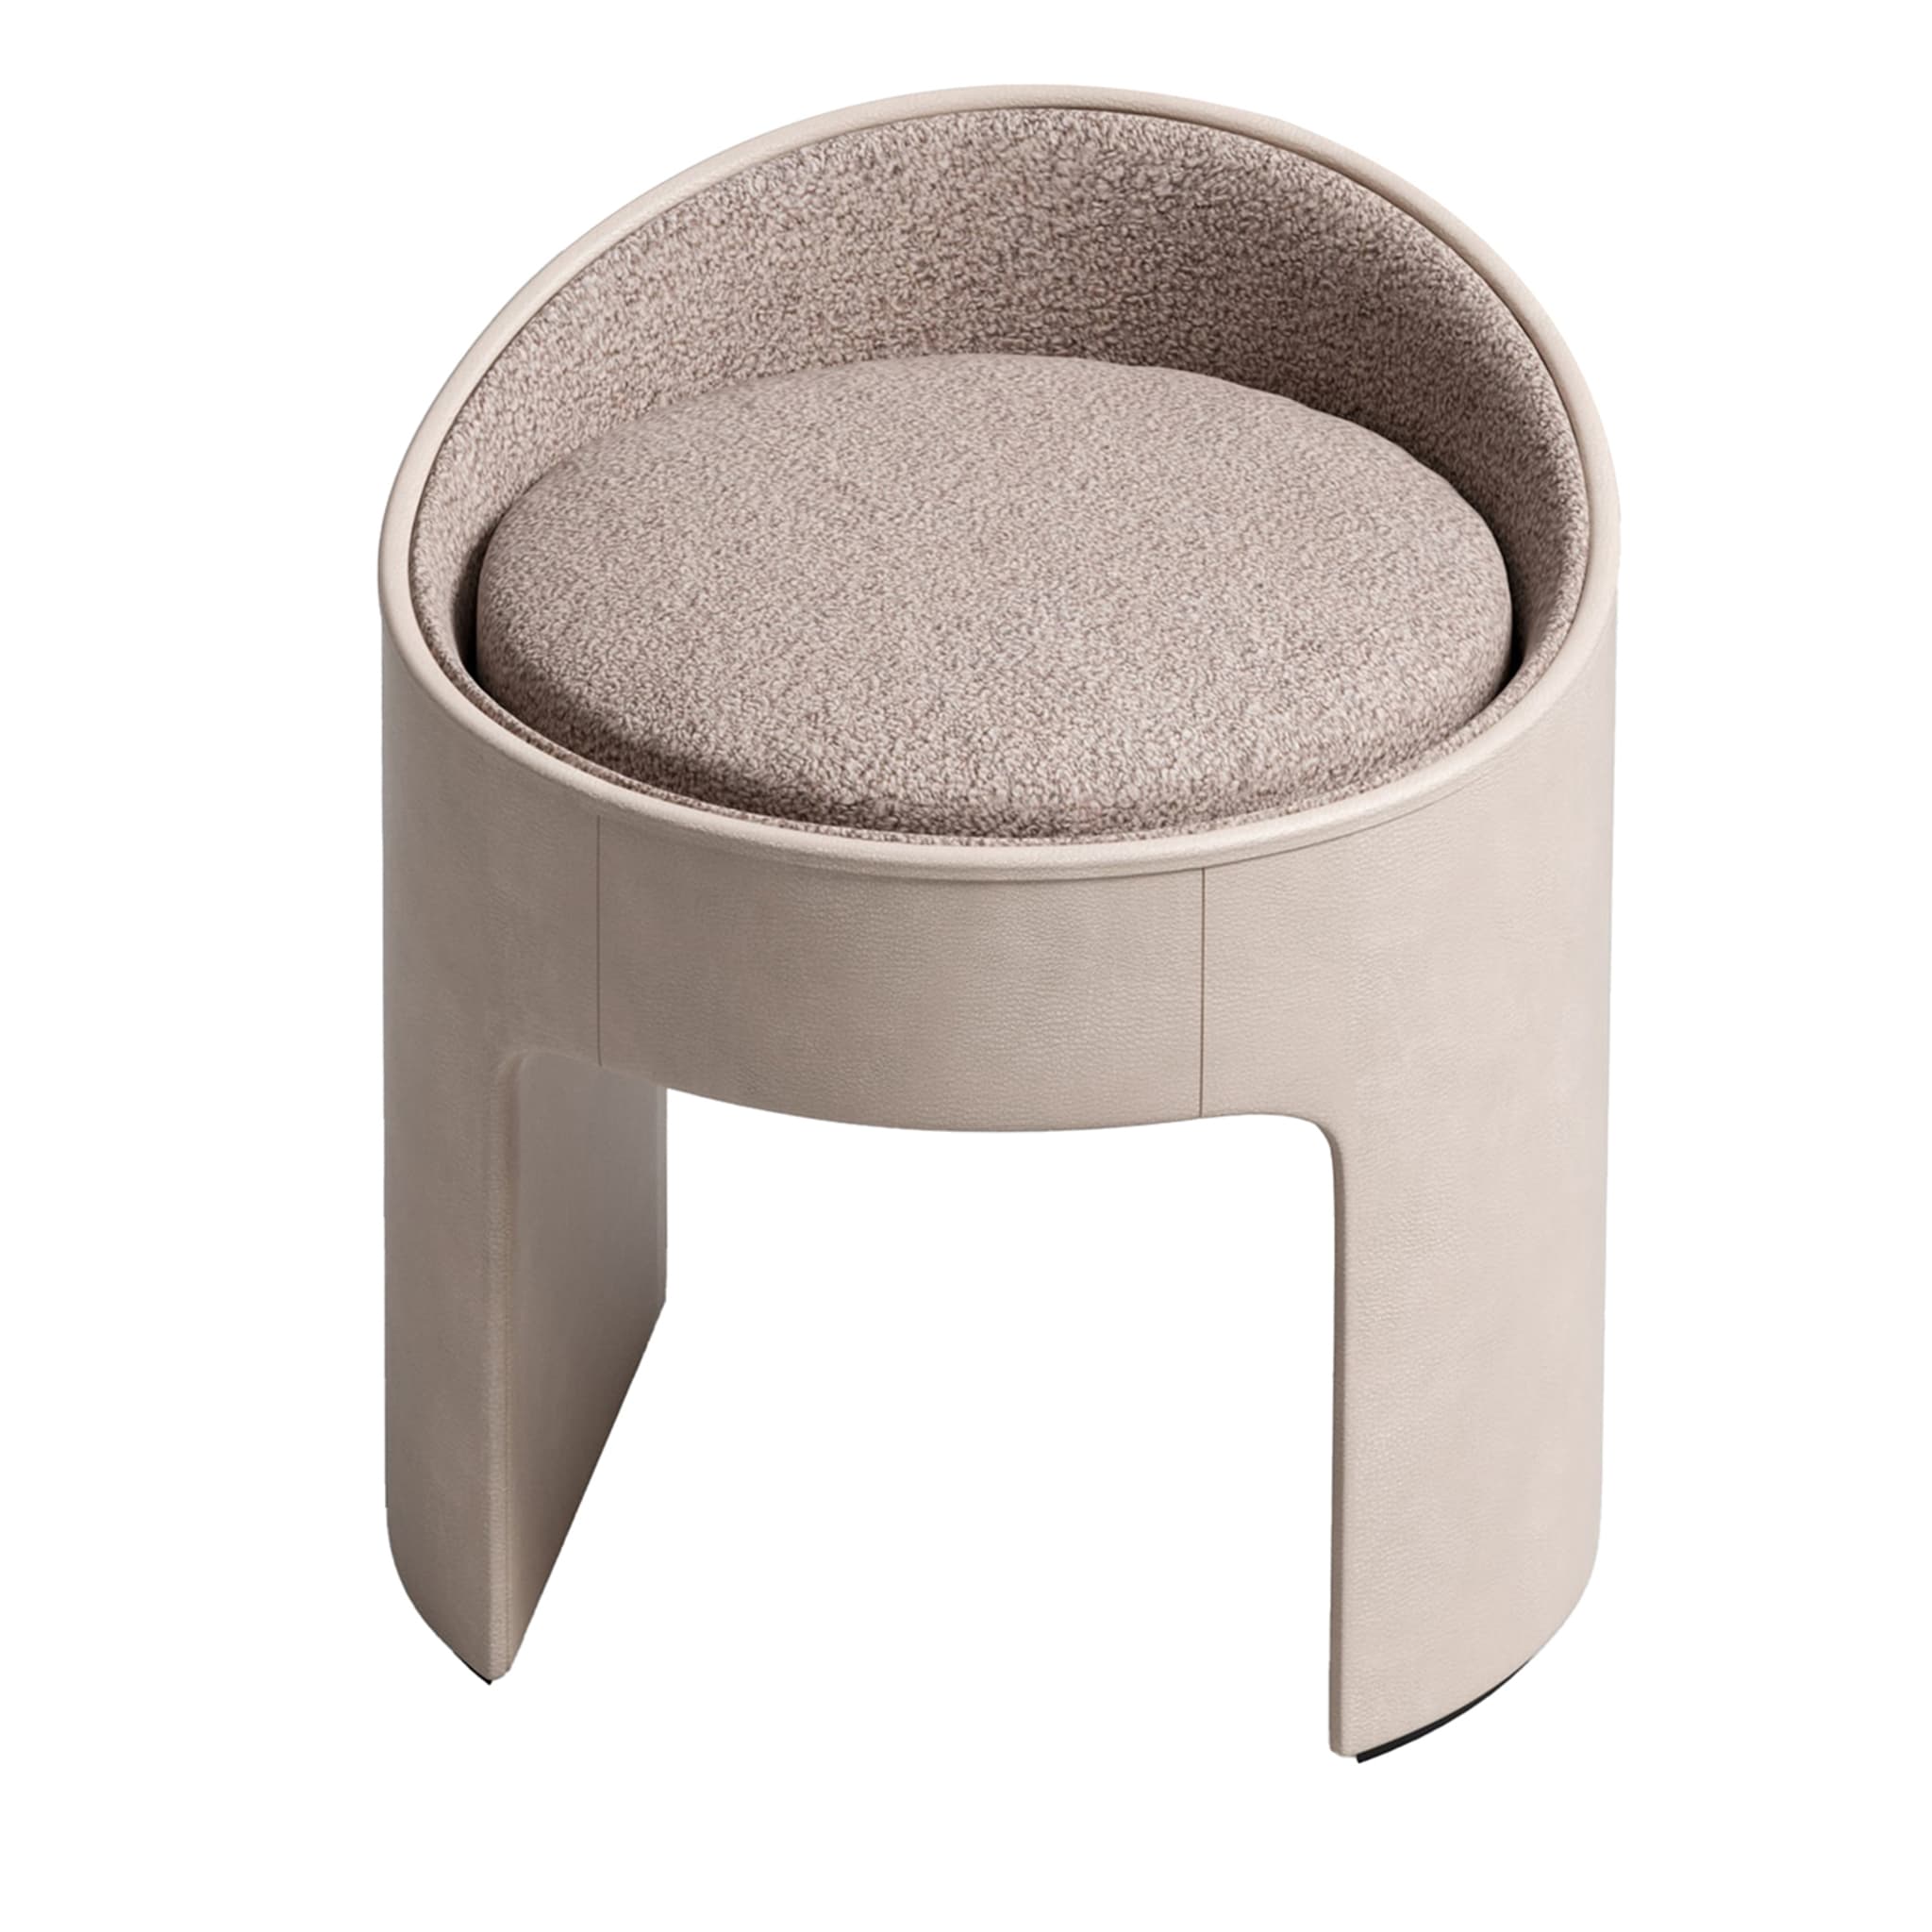 Cream Leather and Fabric Vanity Pouf - Main view